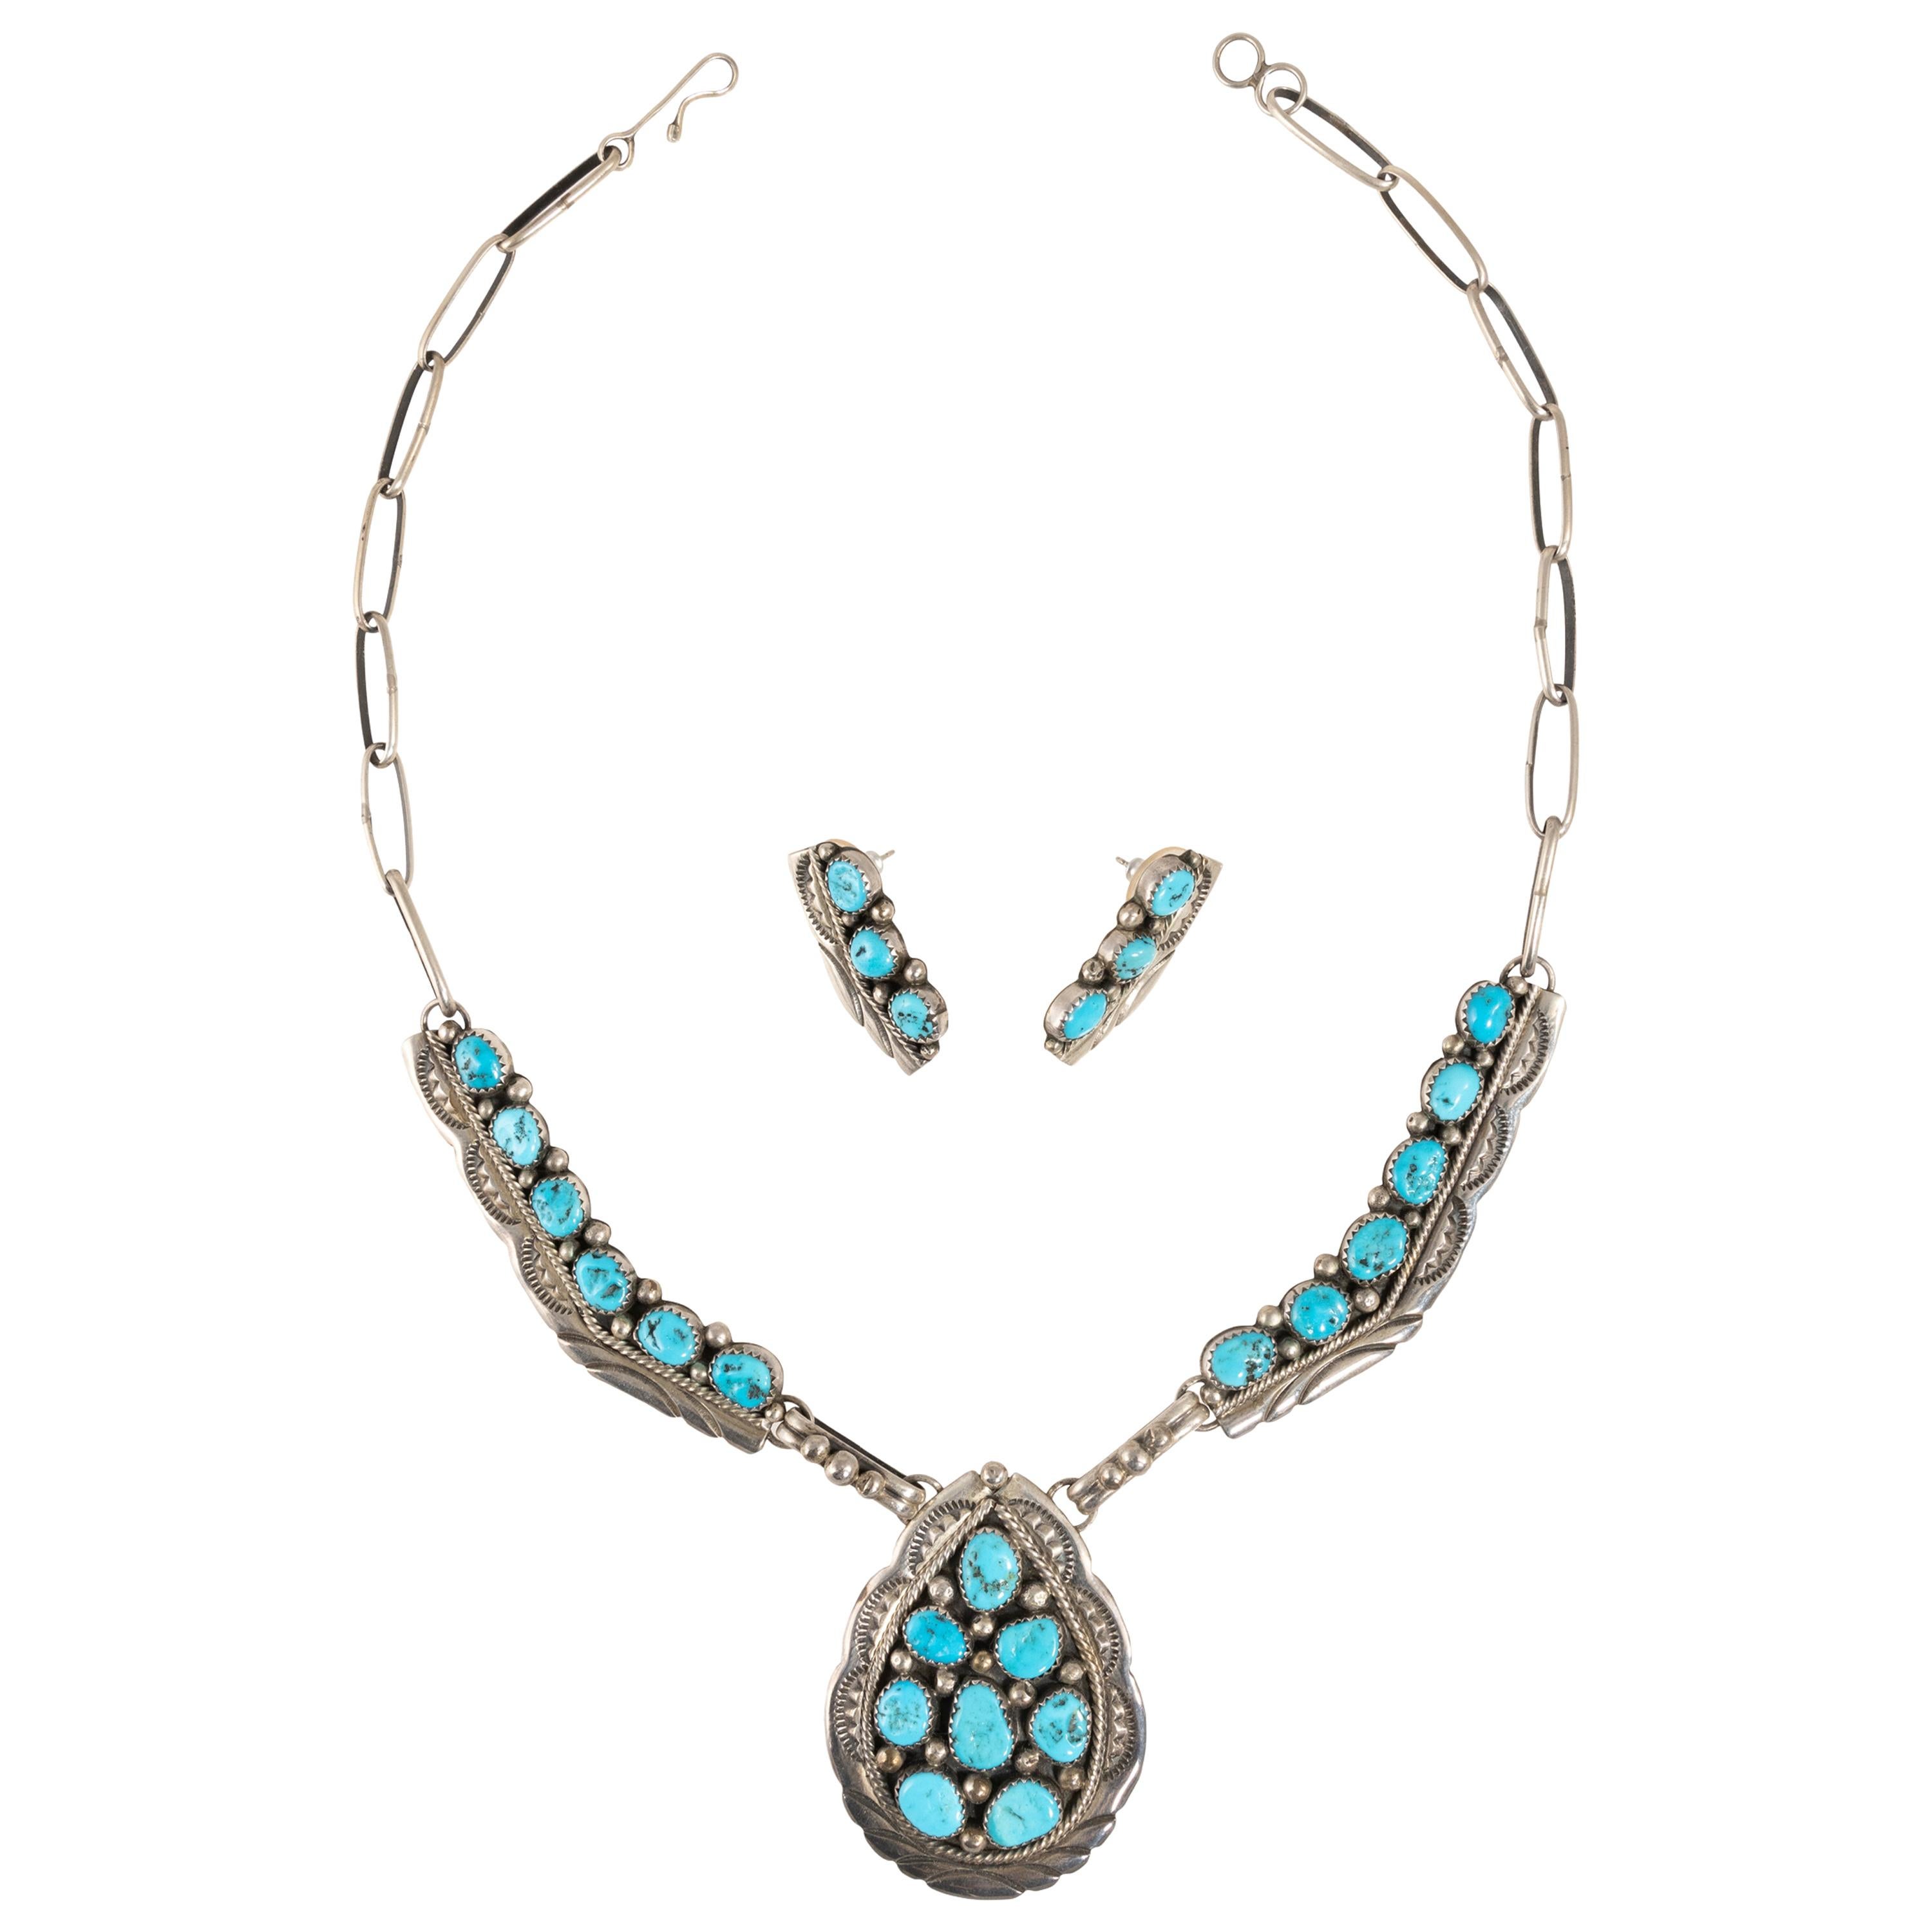 Navajo Sleeping Beauty Turquoise Necklace and Earrings Set